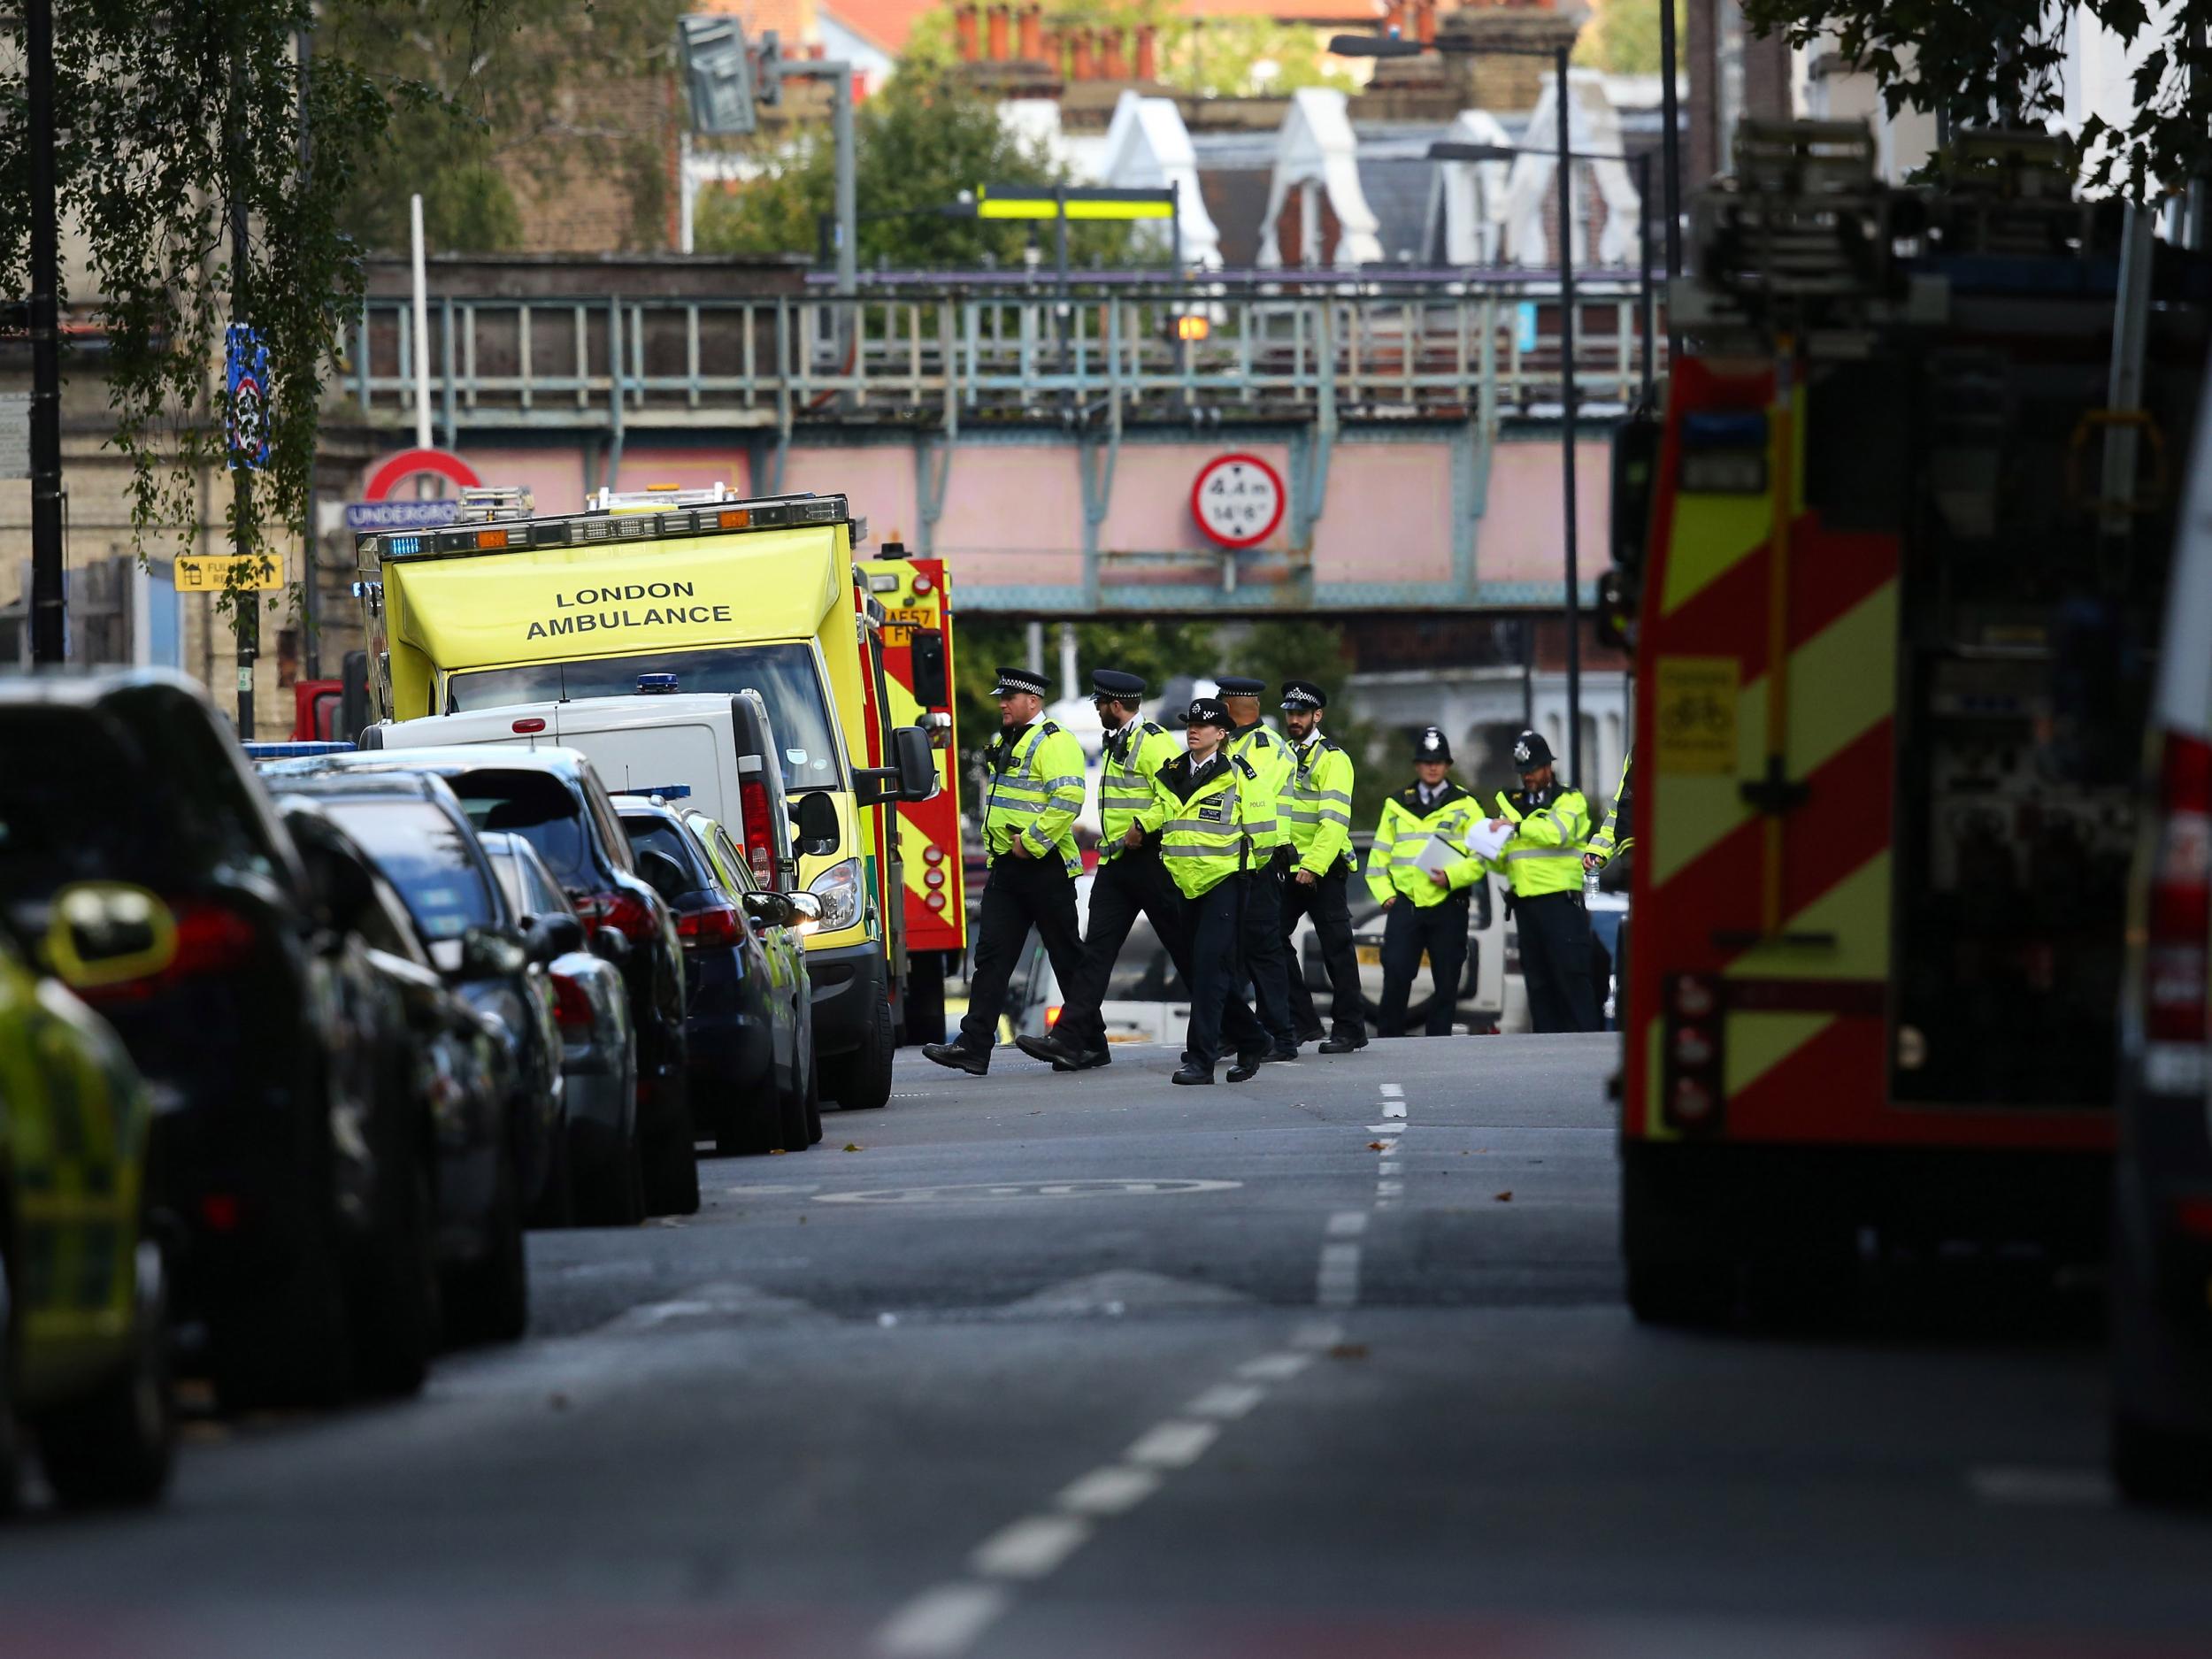 The UK’s terrorist threat level was raised to critical after the attack